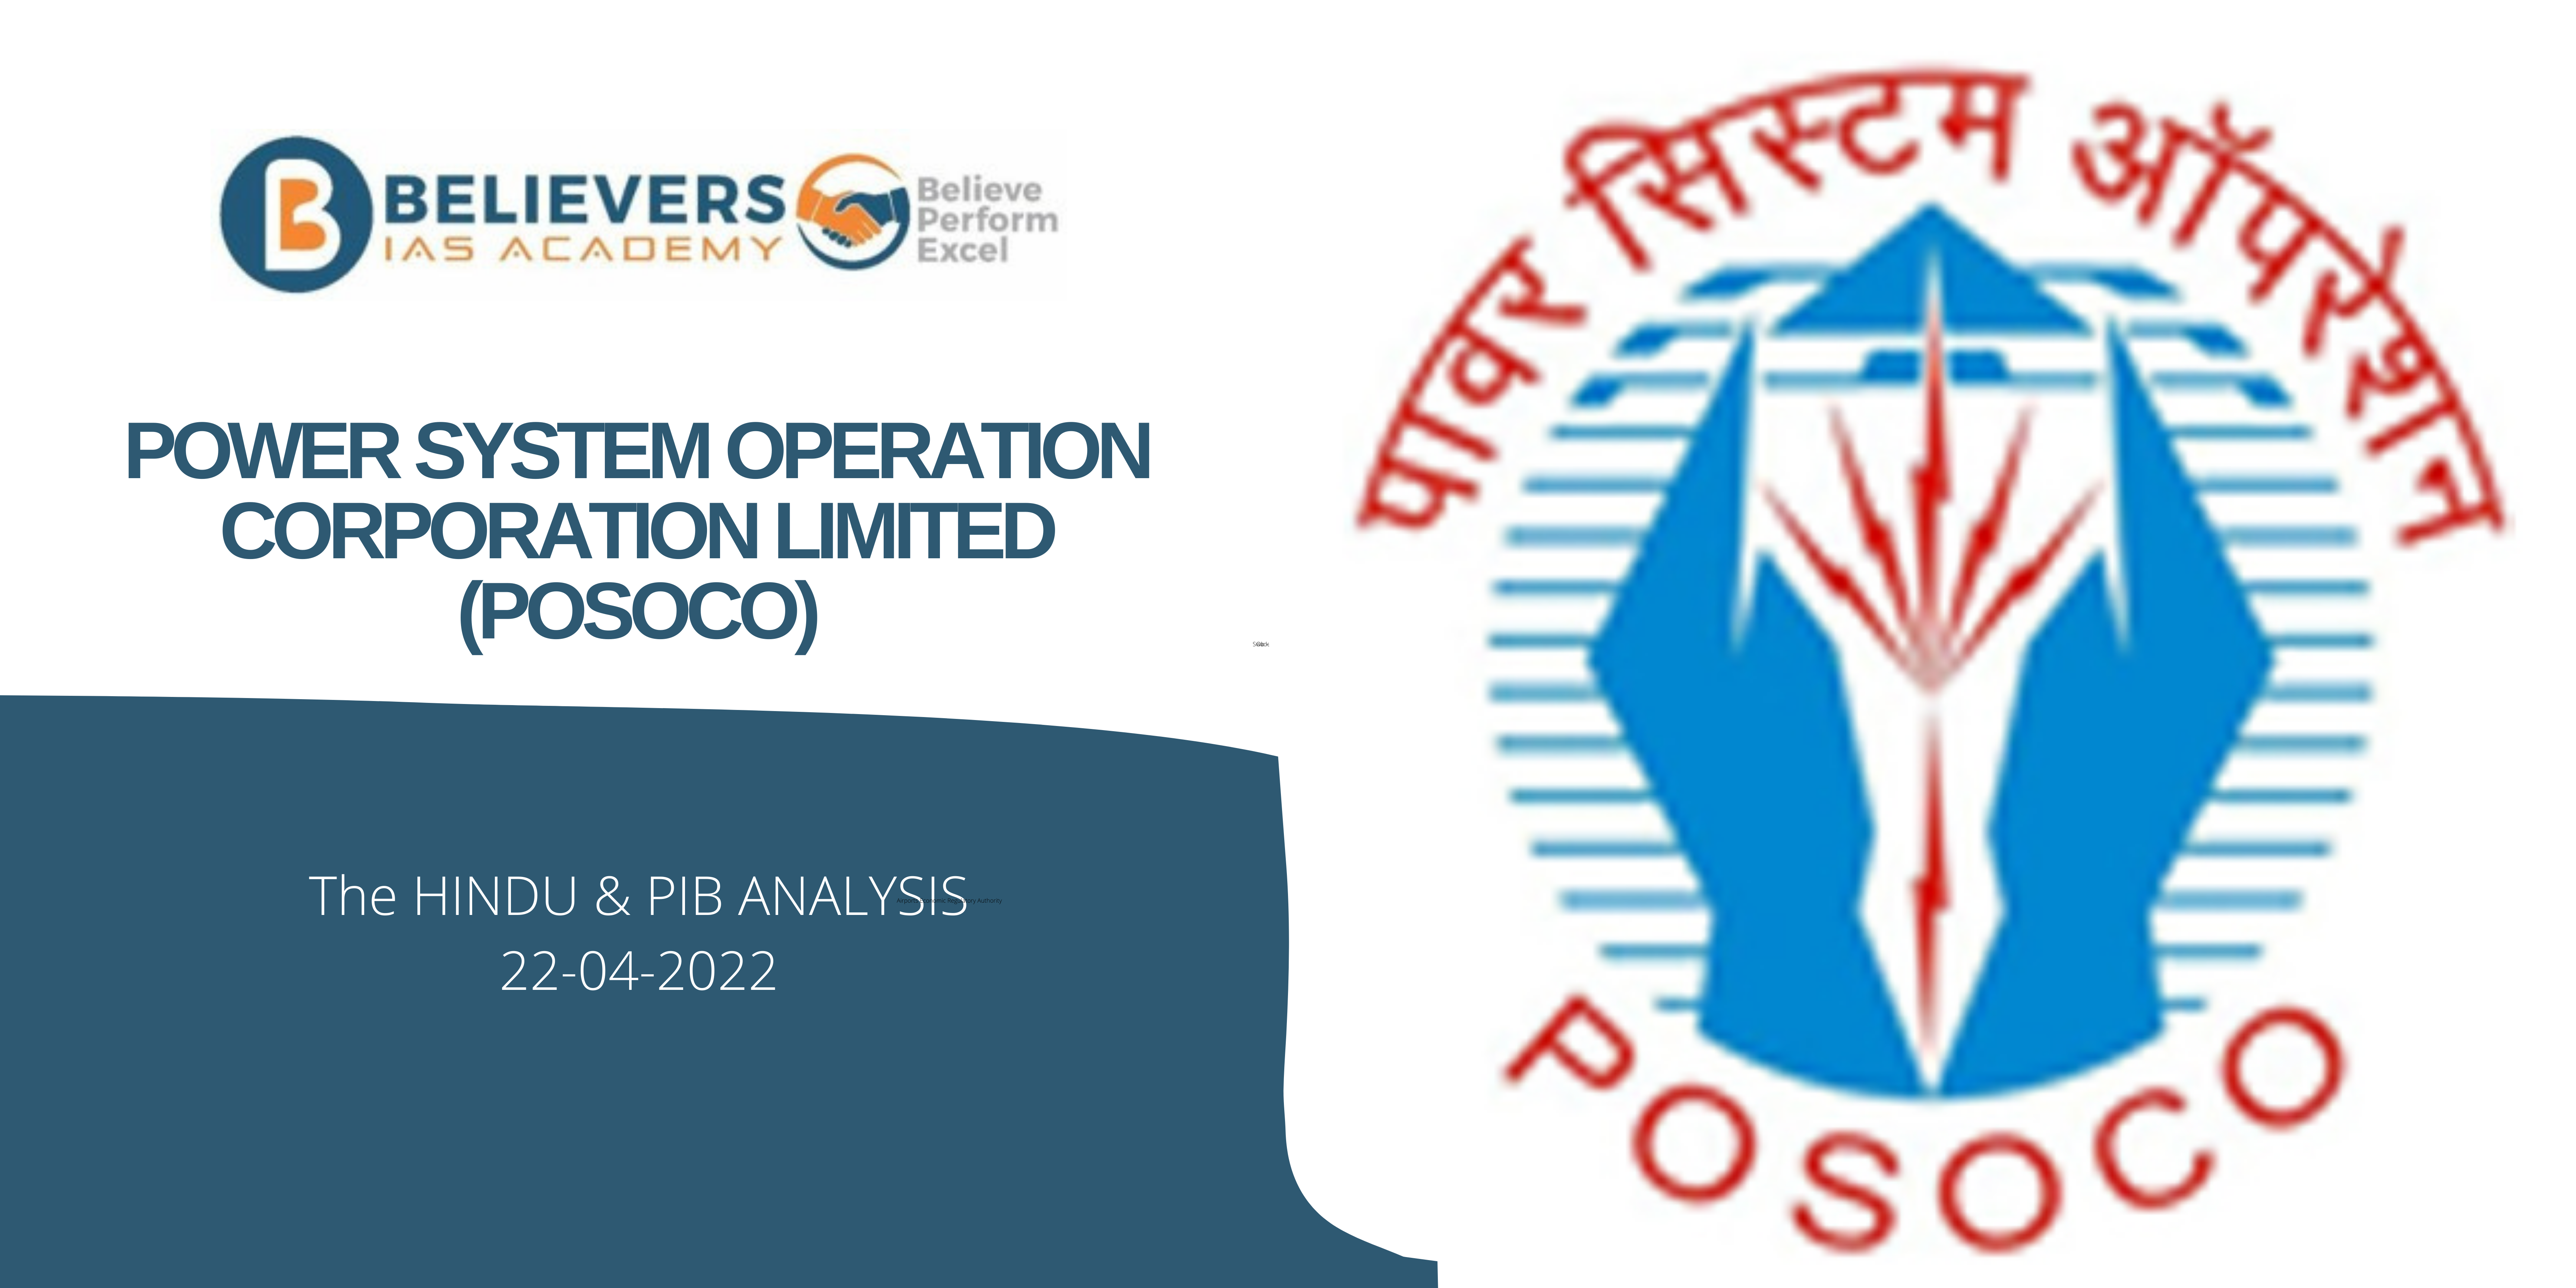 IAS Current affairs - Power System Operation Corporation Limited (POSOCO)